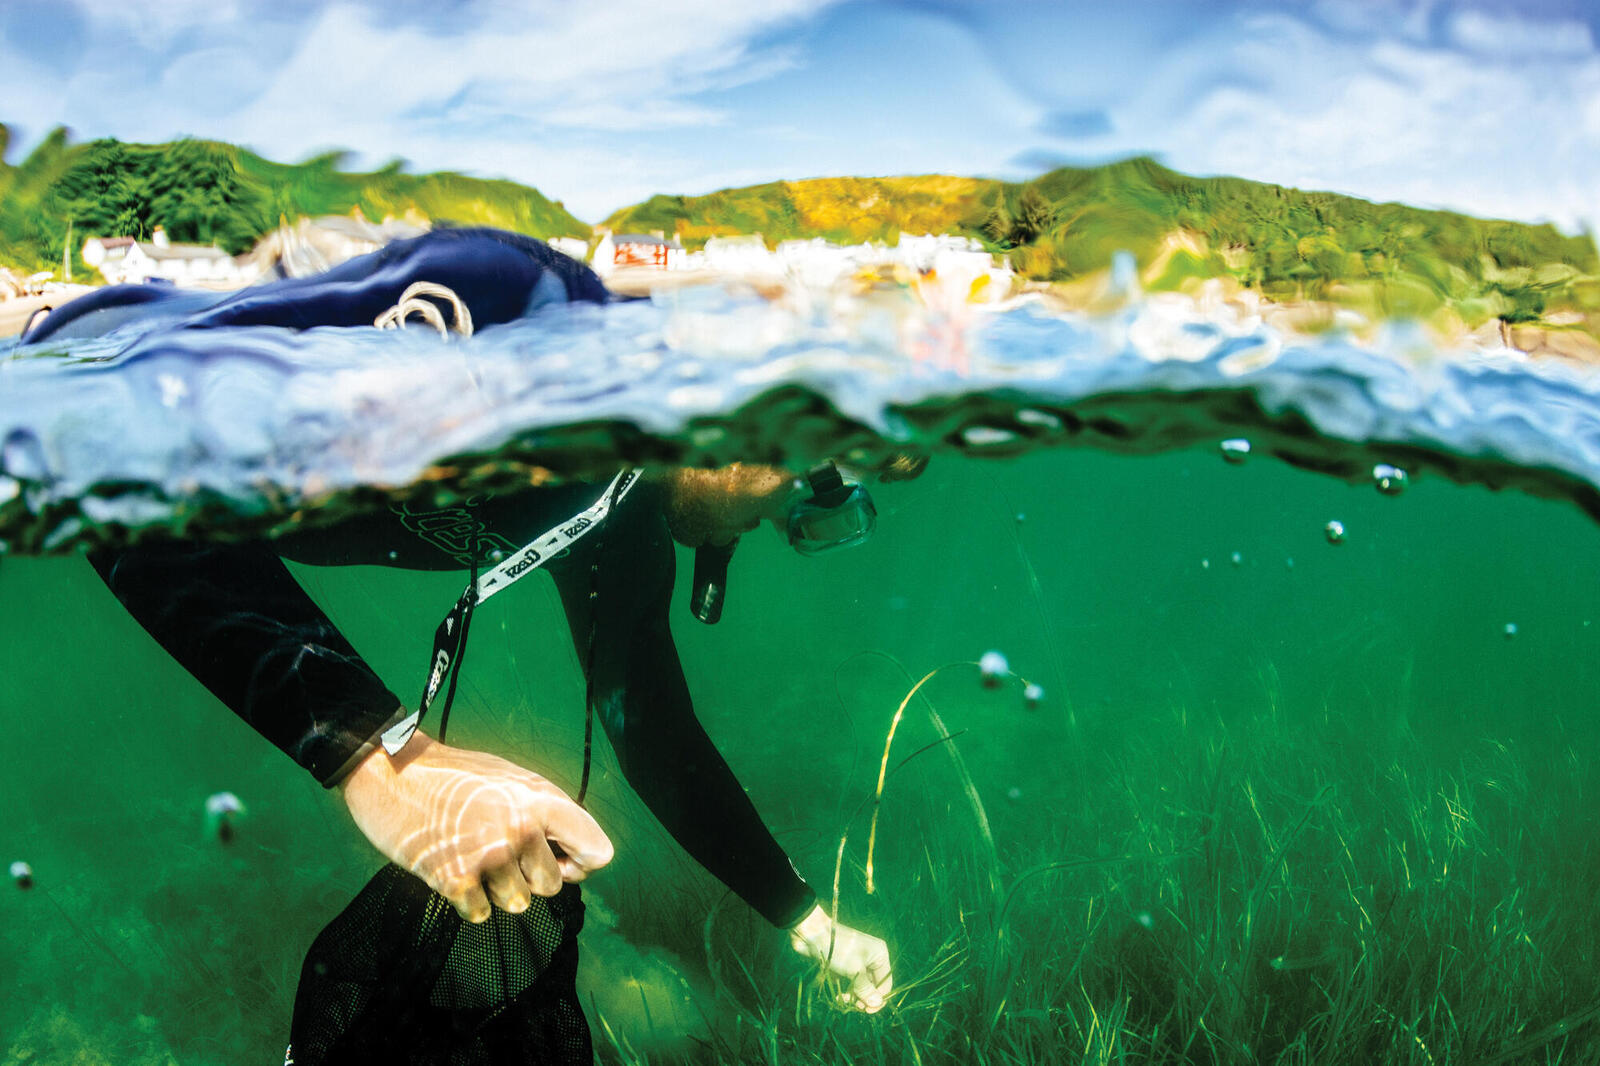 Snorkeler on surface of water collecting seagrass seeds